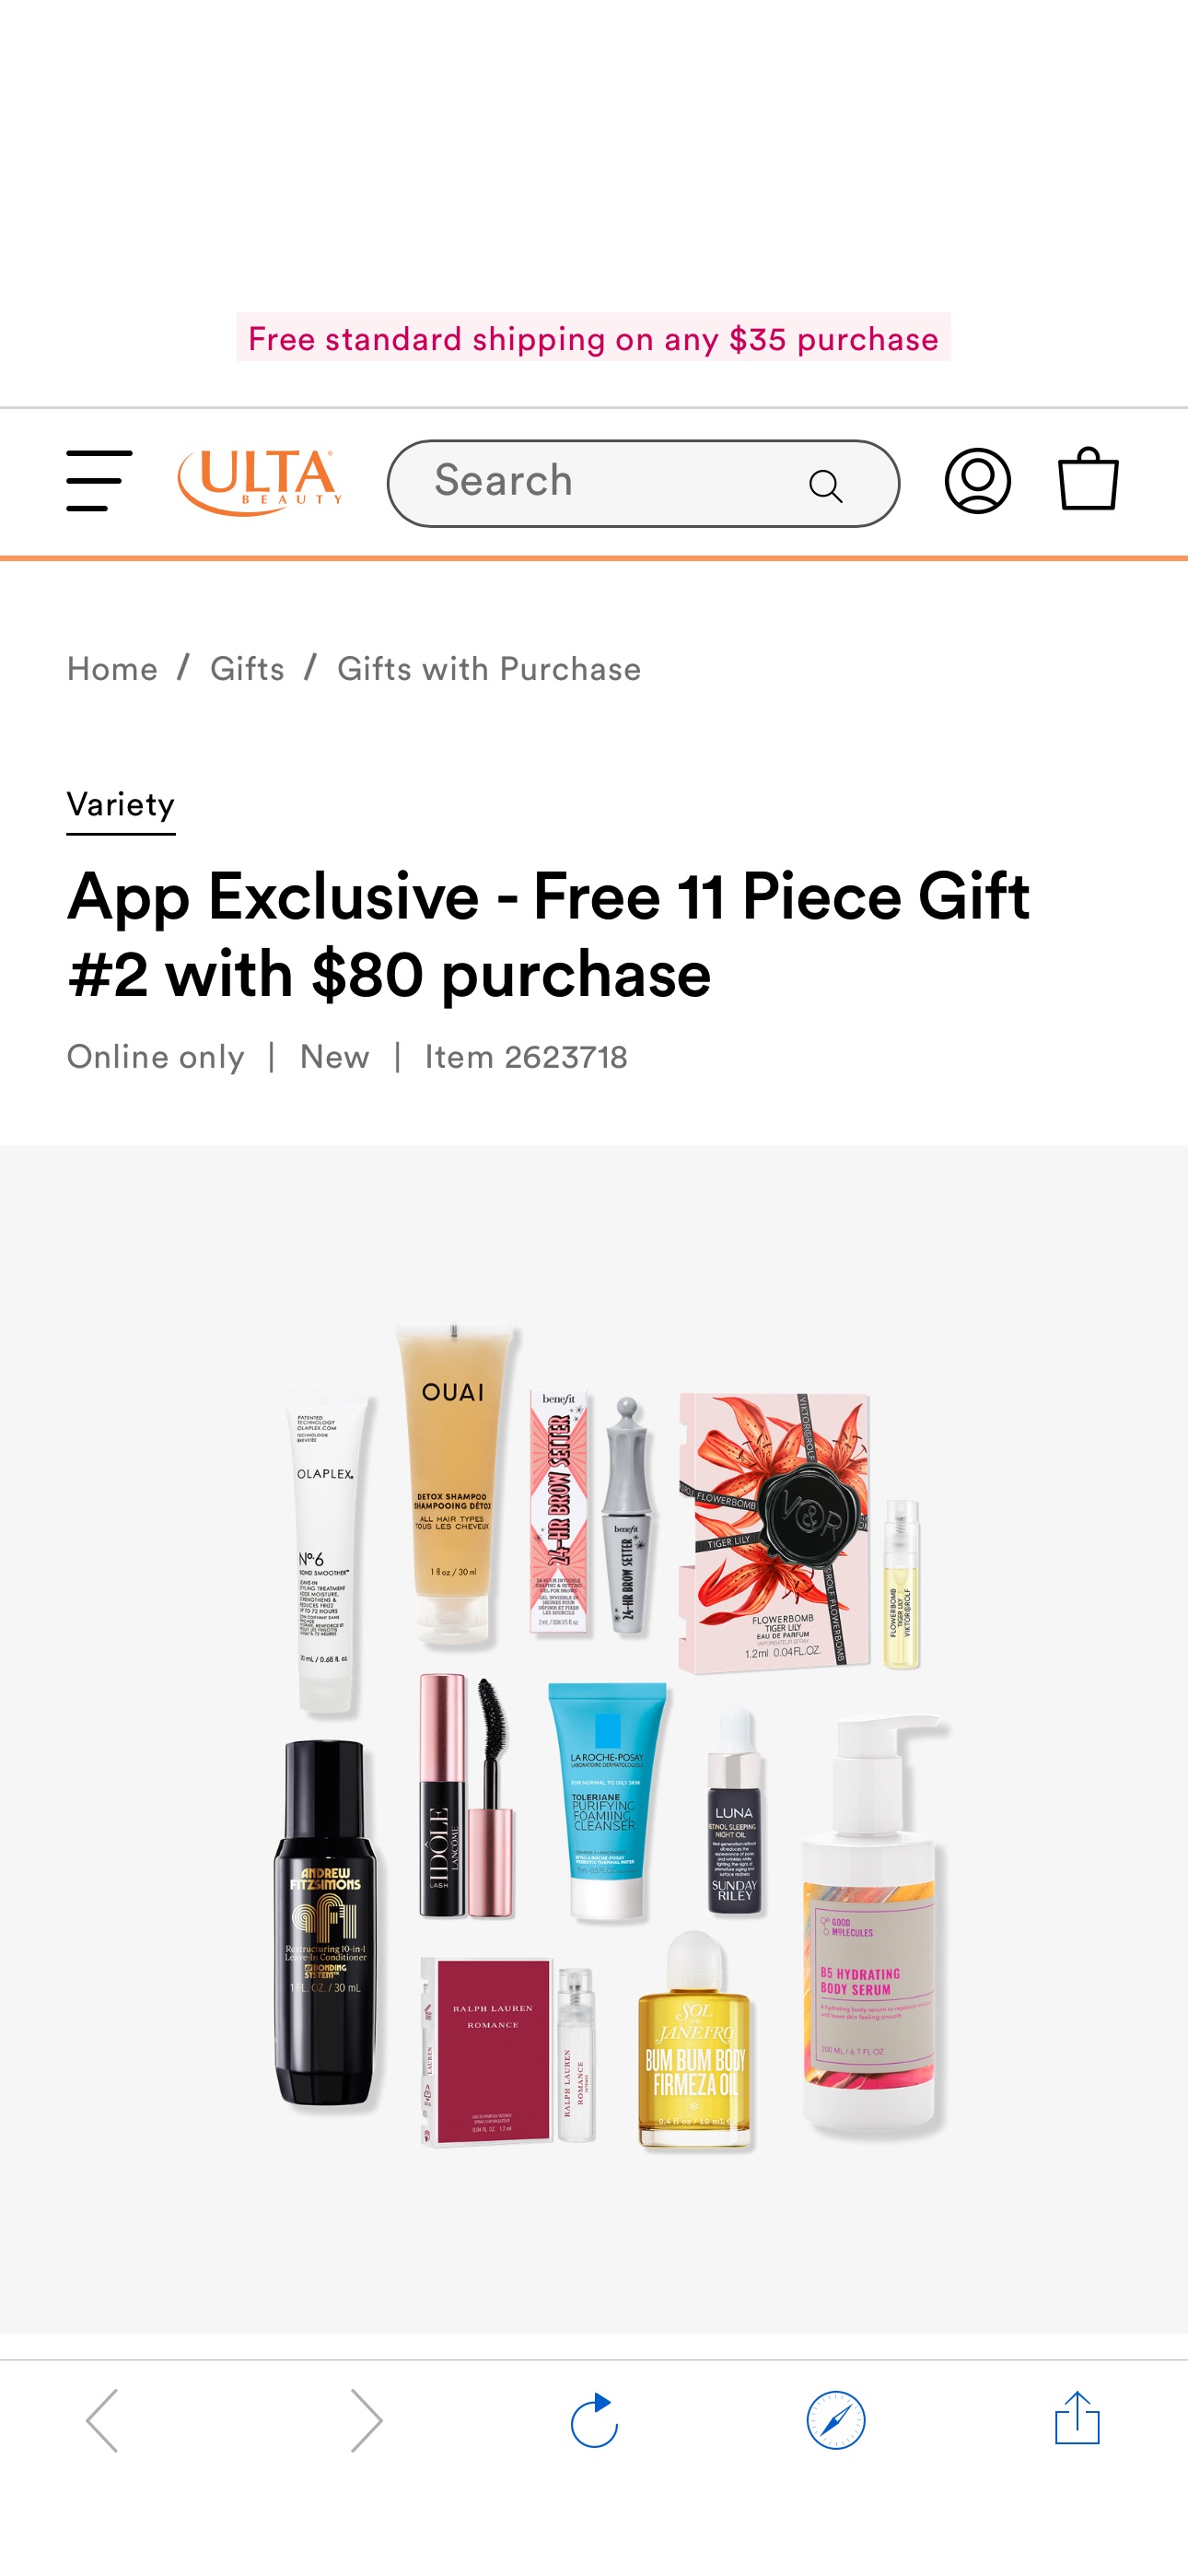 App Exclusive - Free 11 Piece Gift #2 with $80 purchase - Variety | Ulta Beauty